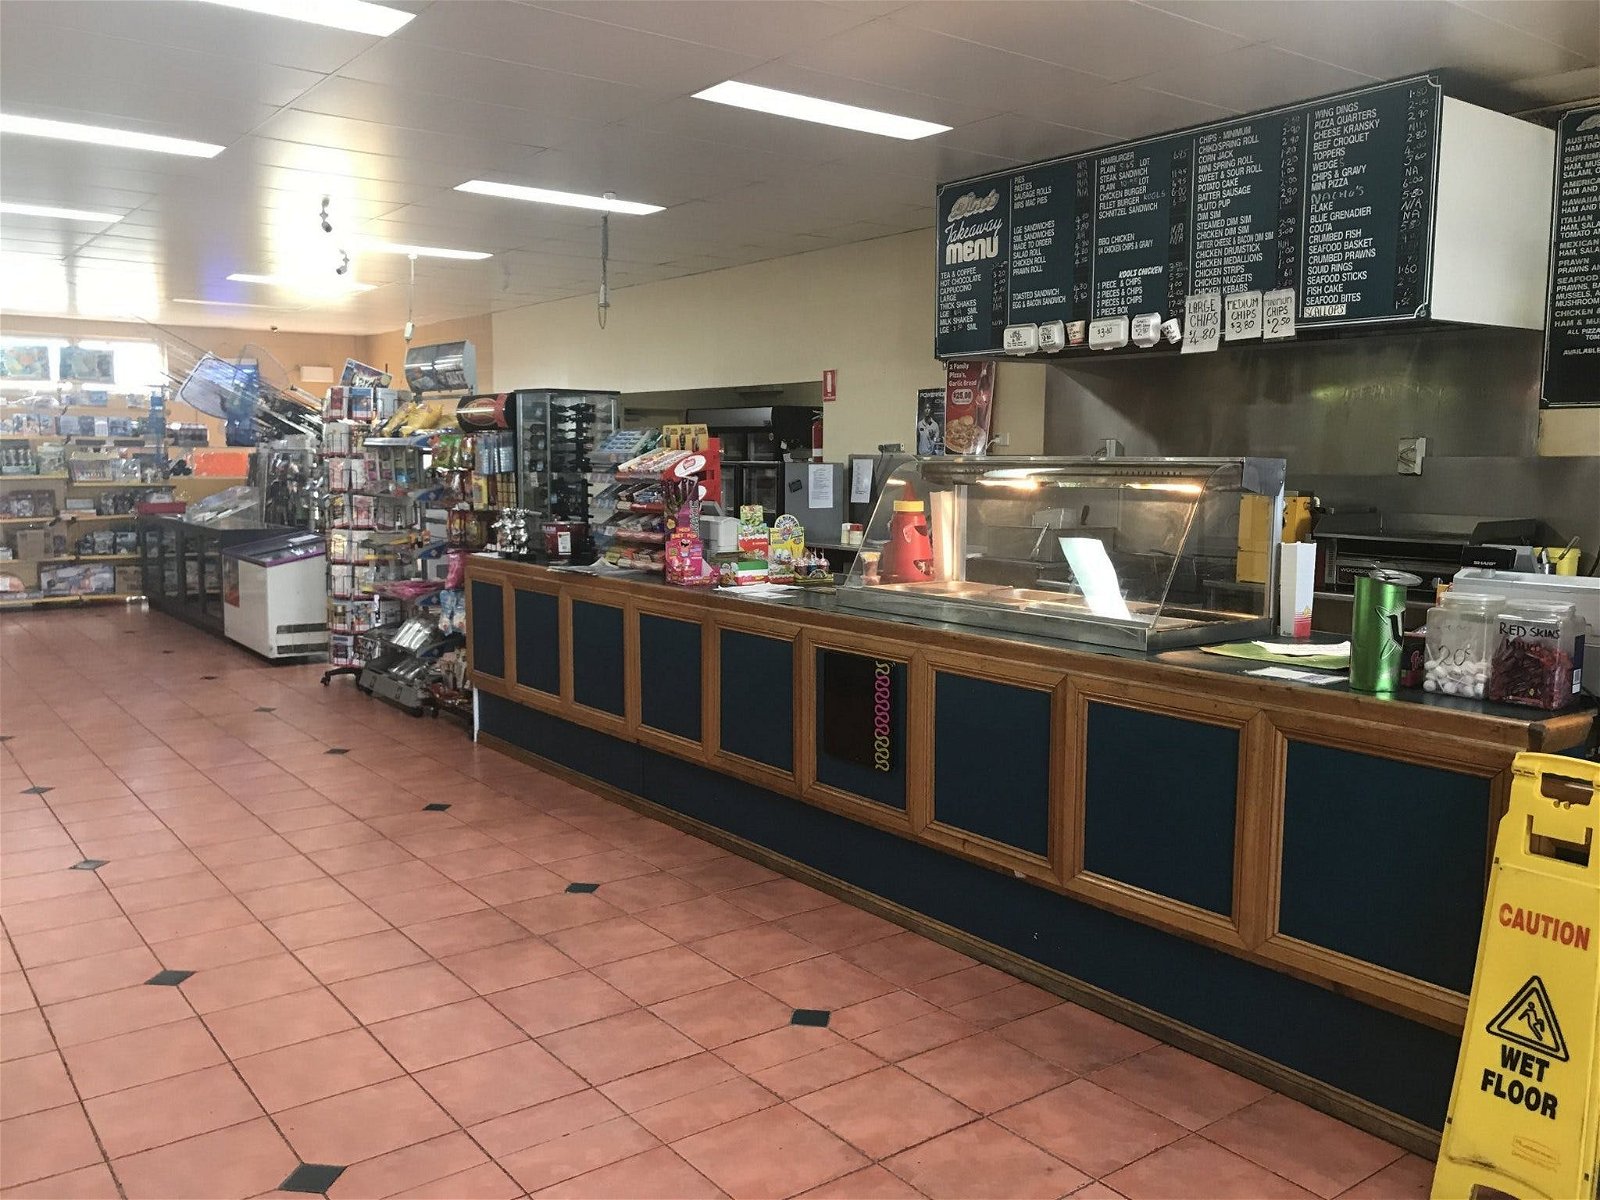 George Town Takeaway and George Town  Restaurant Gold Coast